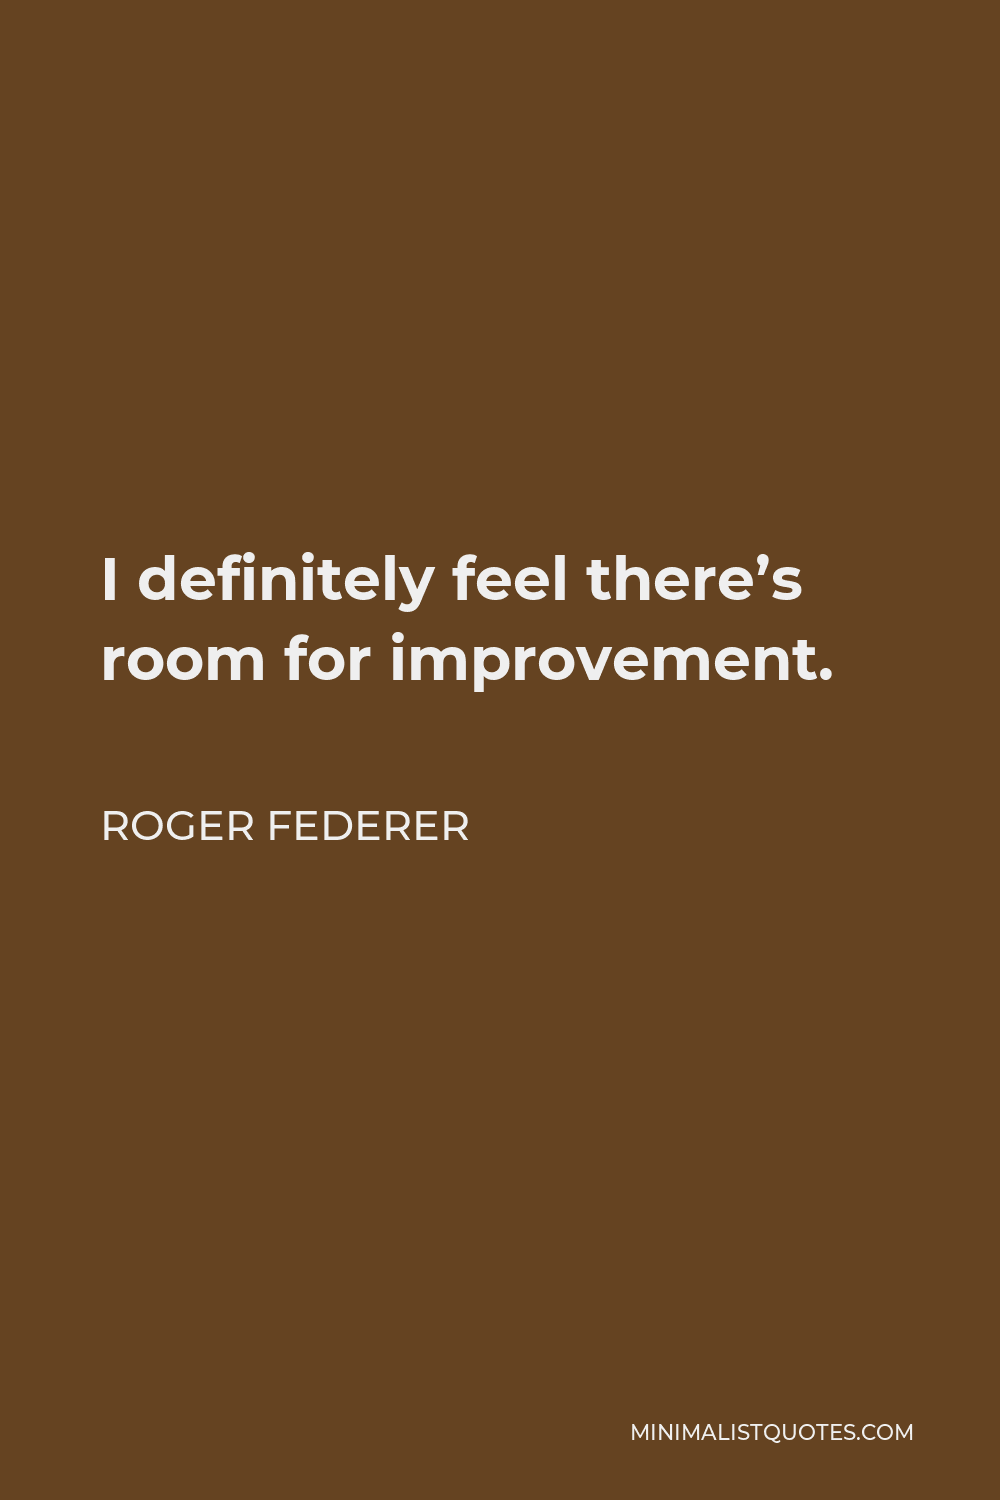 Roger Federer Quote - I definitely feel there’s room for improvement.